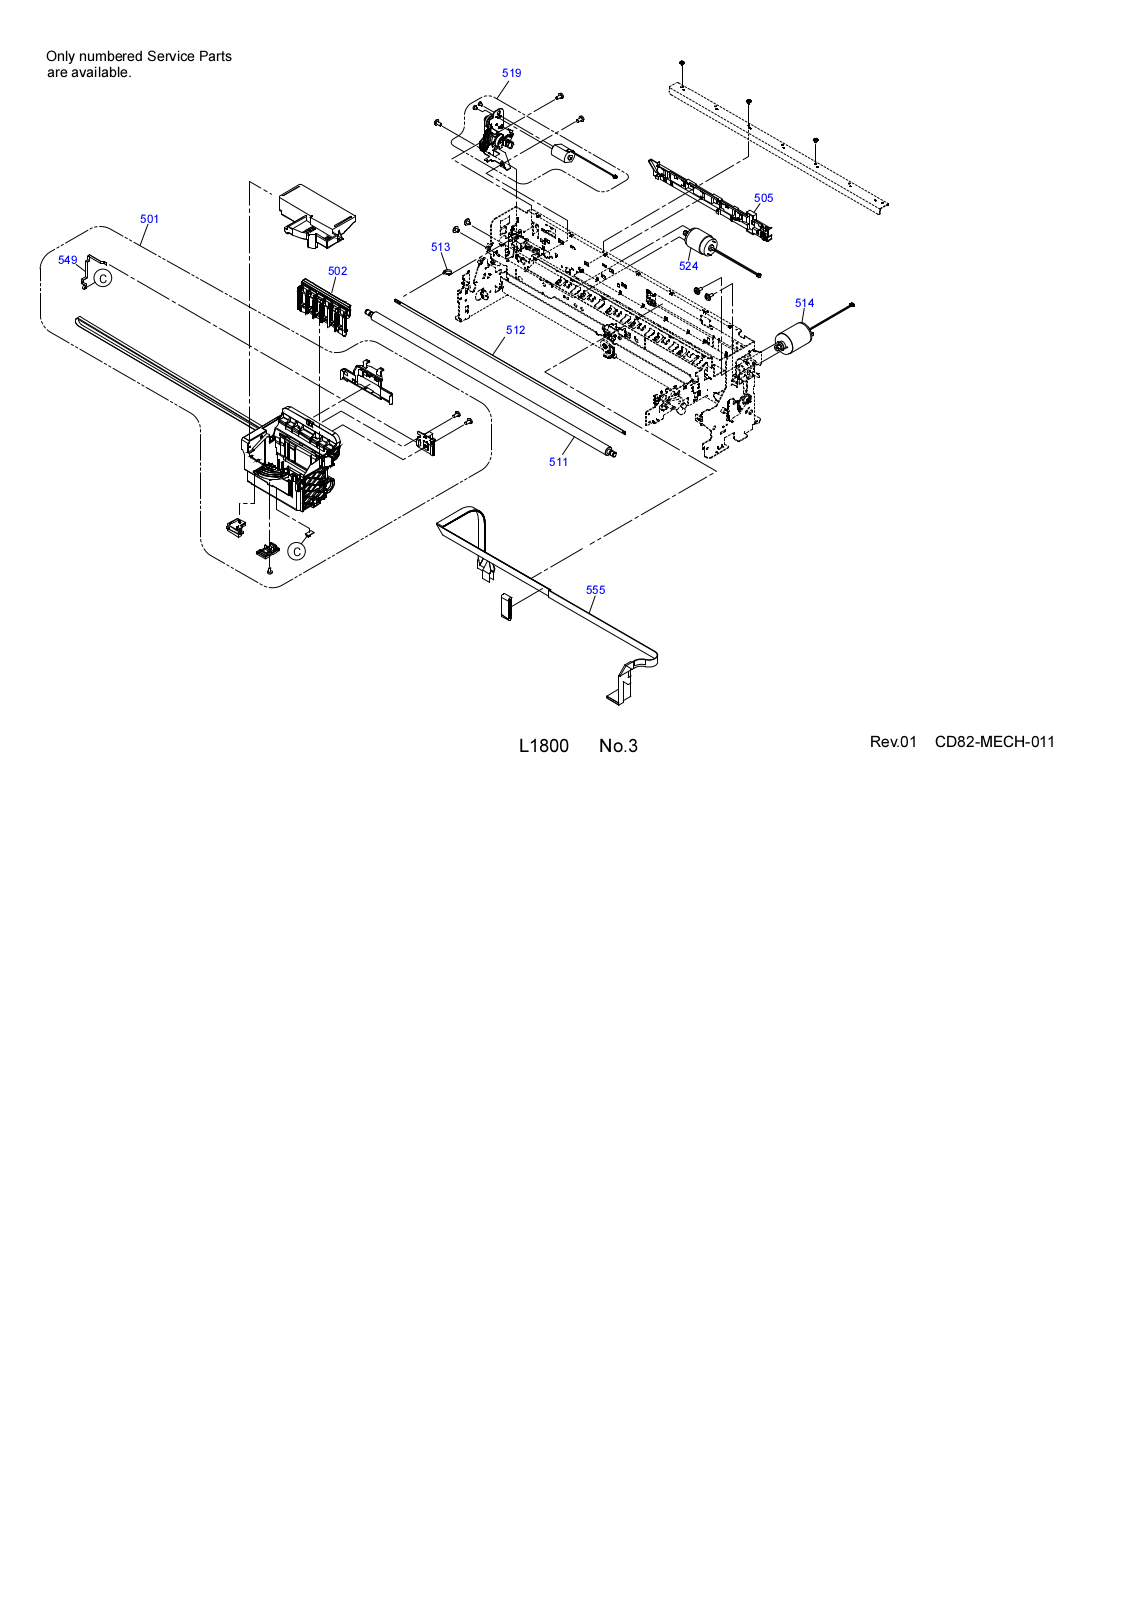 Epson L1800 Exploded Diagrams 3